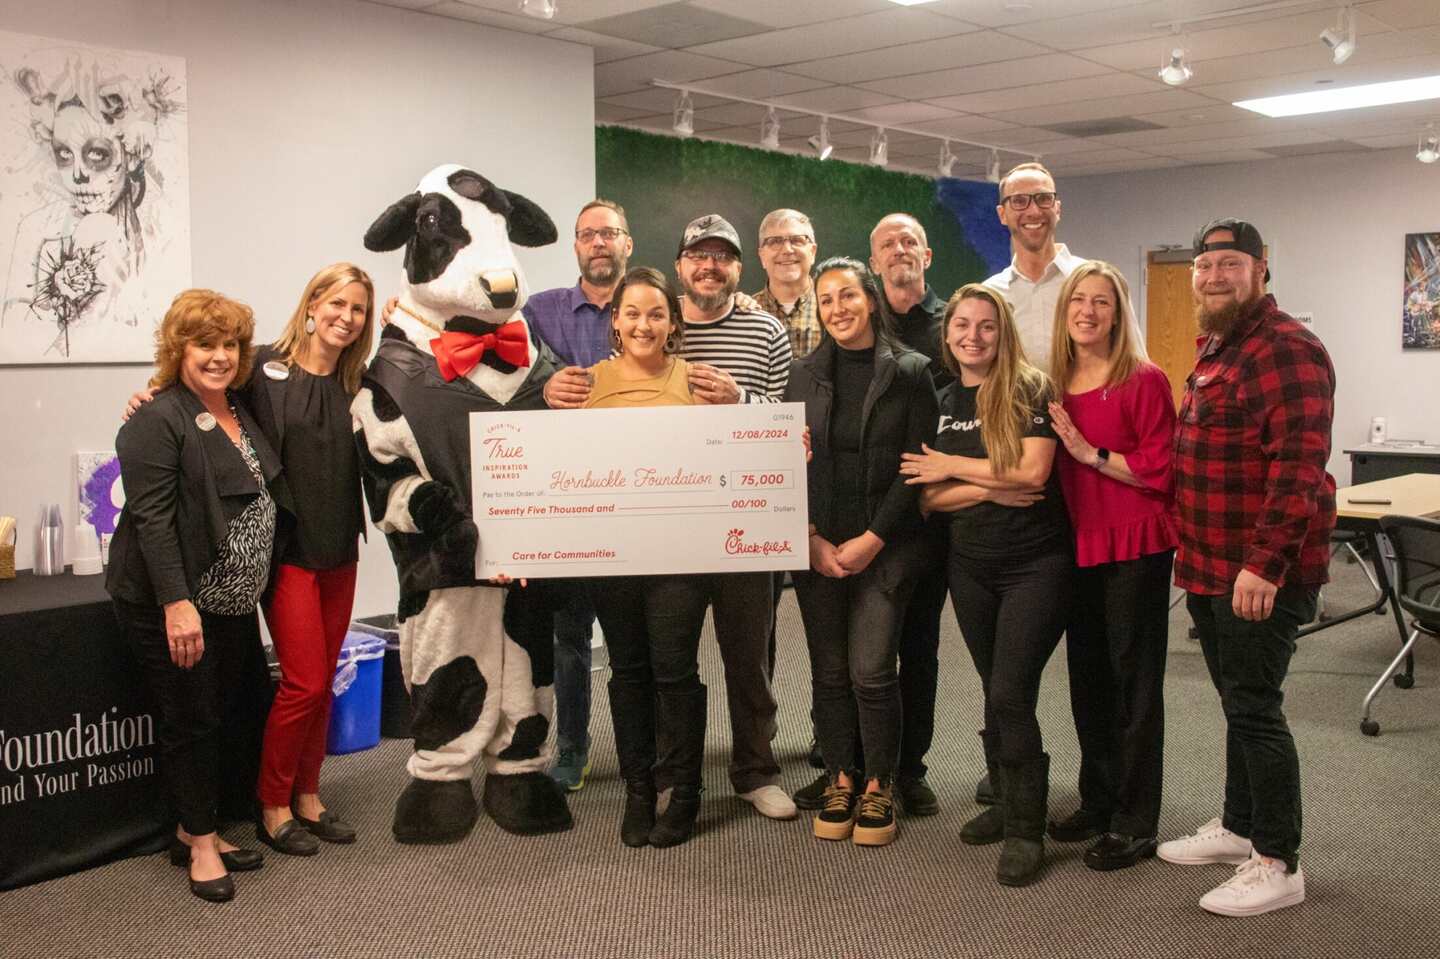 Hornbuckle Foundation of Littleton, Colorado holding a True Inspiration Award check with the Chick-fil-A Cow. 